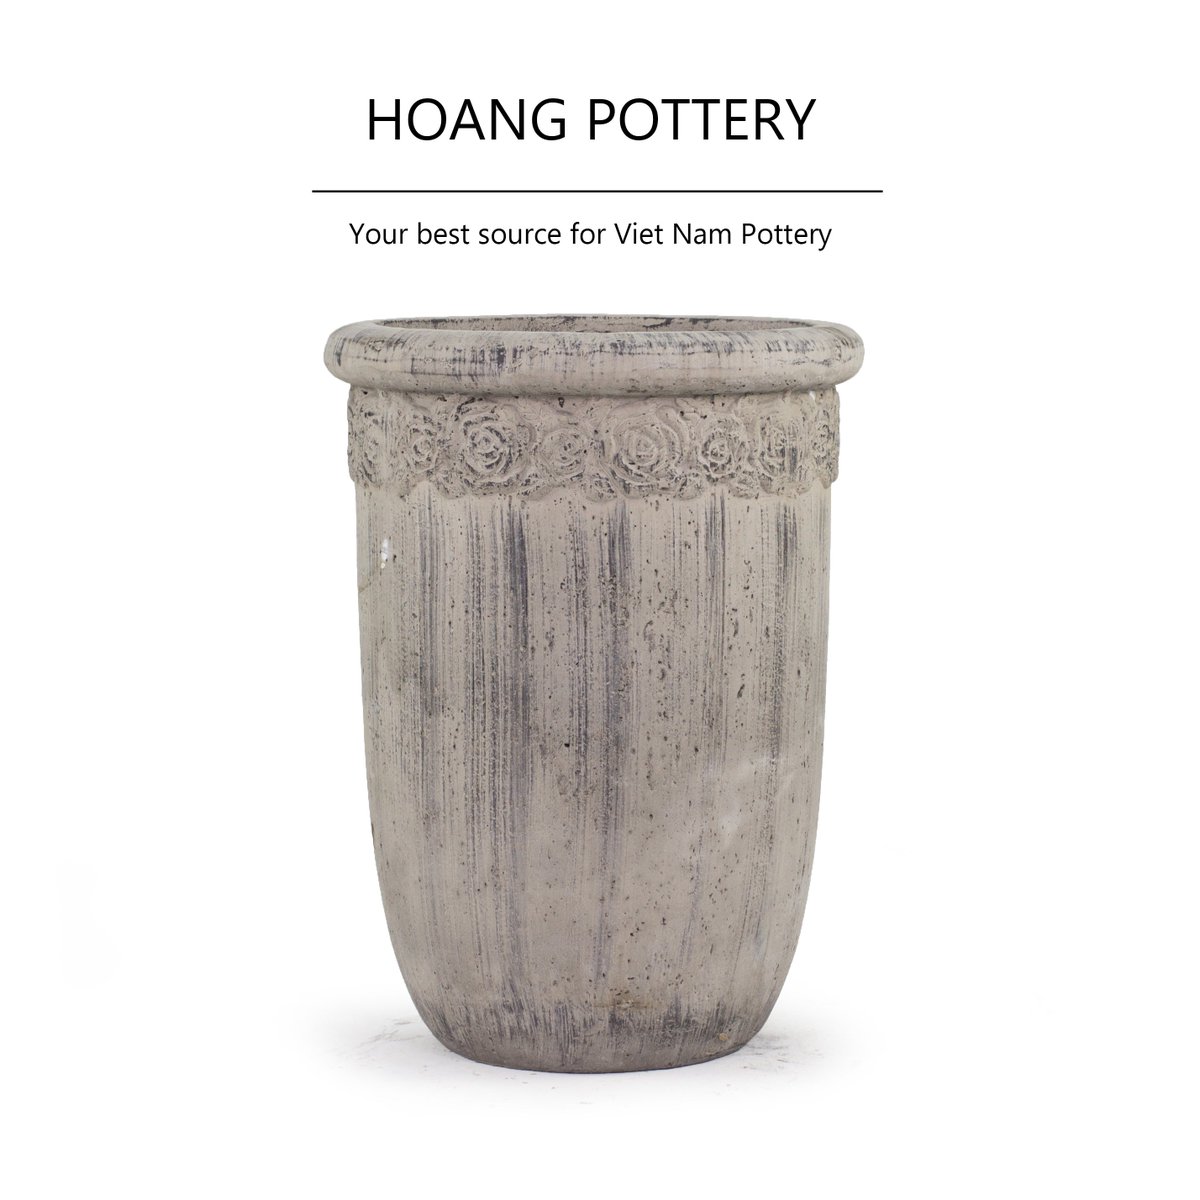 #Special #cement #vase with #beautiful #rosepattern 🌸🌹☘️
✨Each detail was #carved #smoothly #byhand with precise care 😉
#vietnam #pottery #pot #planter #flowerpot #delicate #rose #concrete #smooth #meticulous #potterysupplier #ontrend #decorproduct #handmade #decor #design